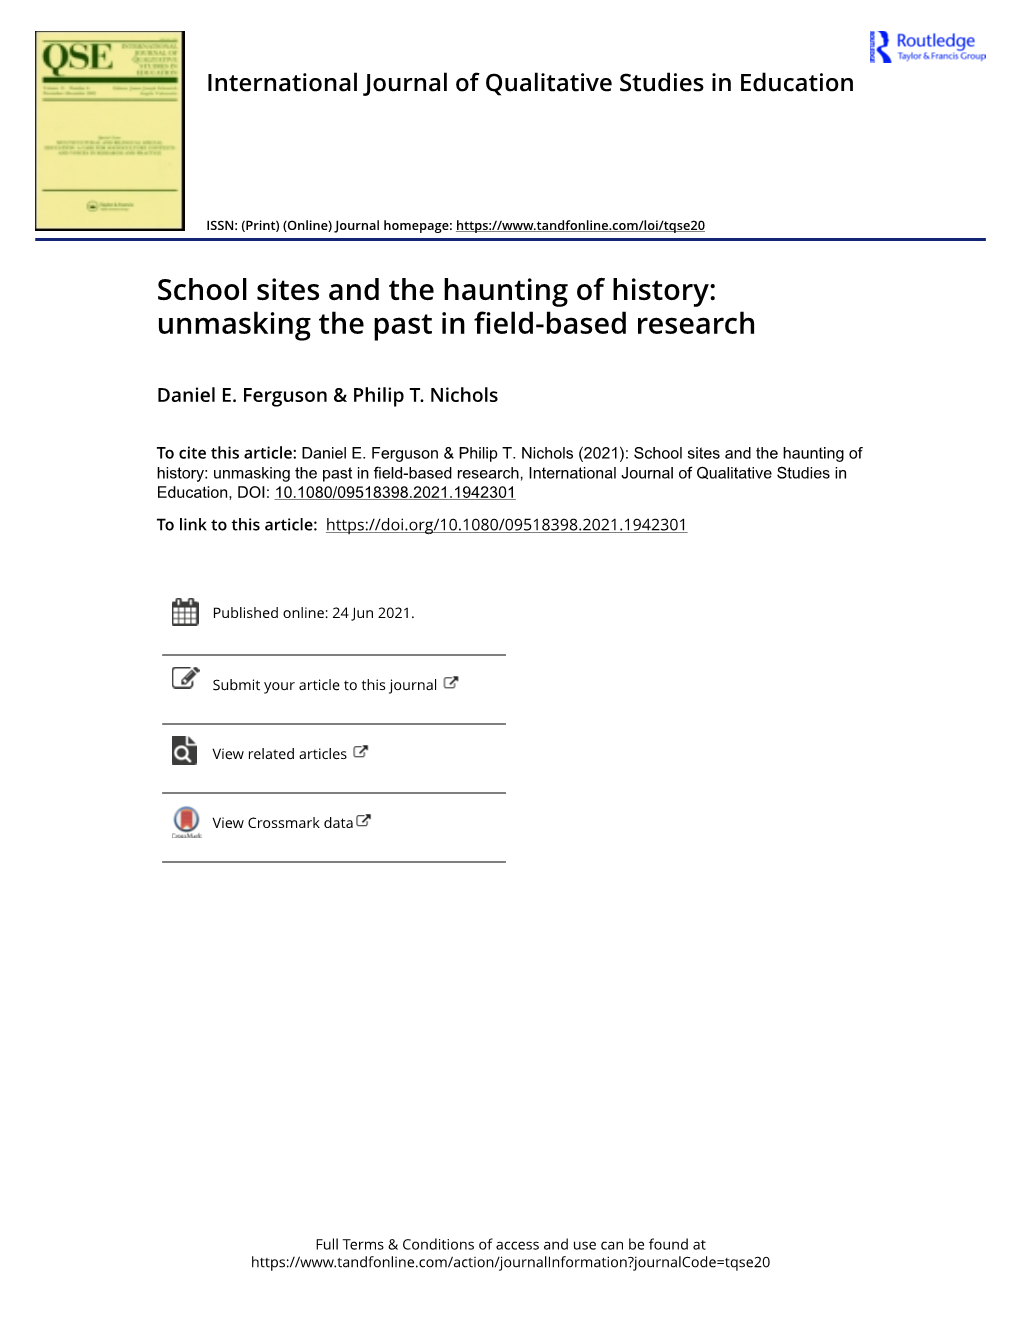 School Sites and the Haunting of History: Unmasking the Past in Field-Based Research